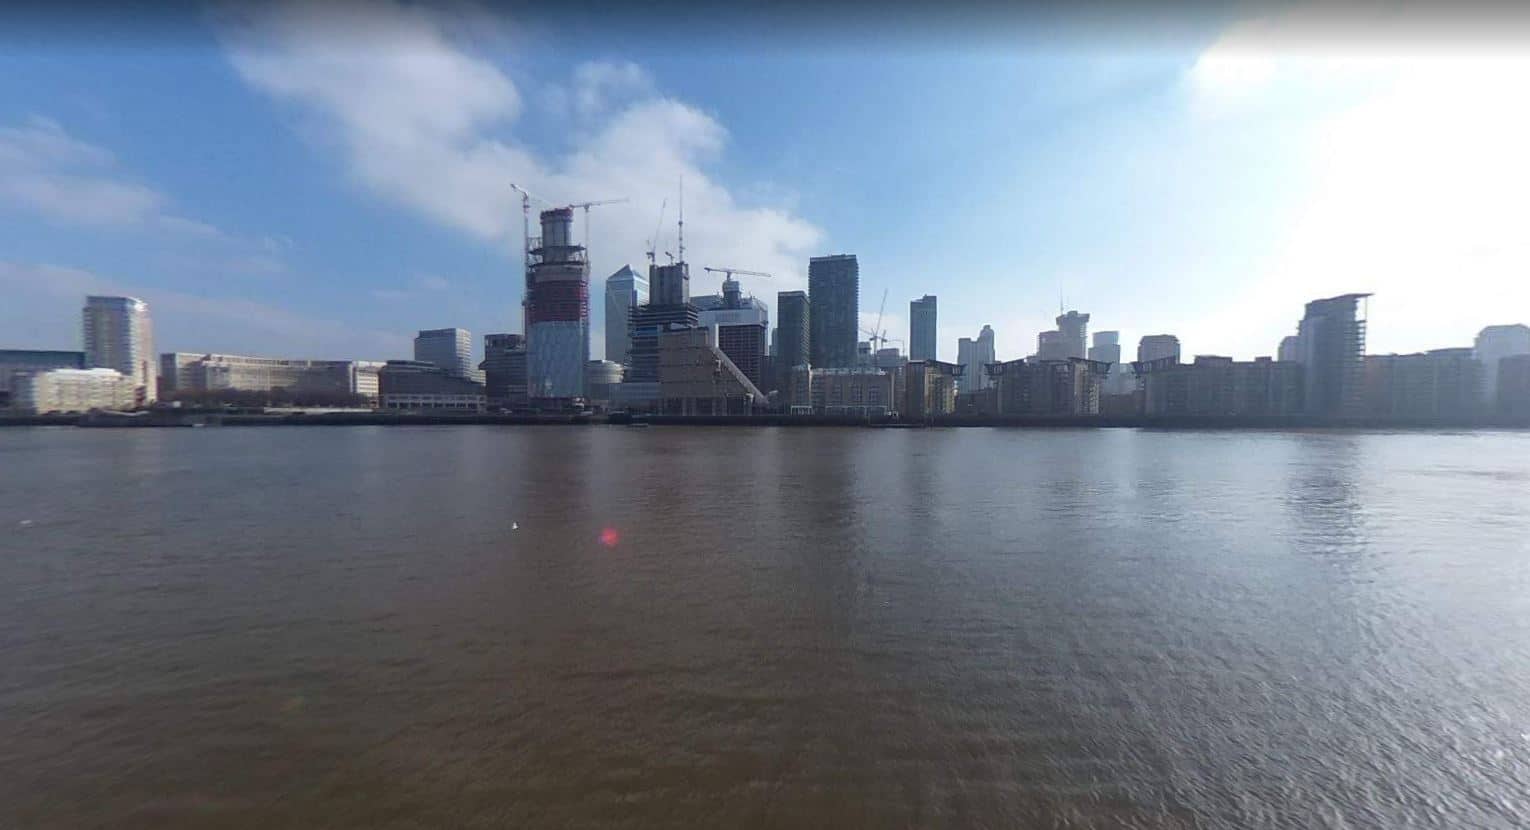 The view to Canary Wharf from Durand's Wharf, where the bridge is expected to be built (Image: Google Maps)